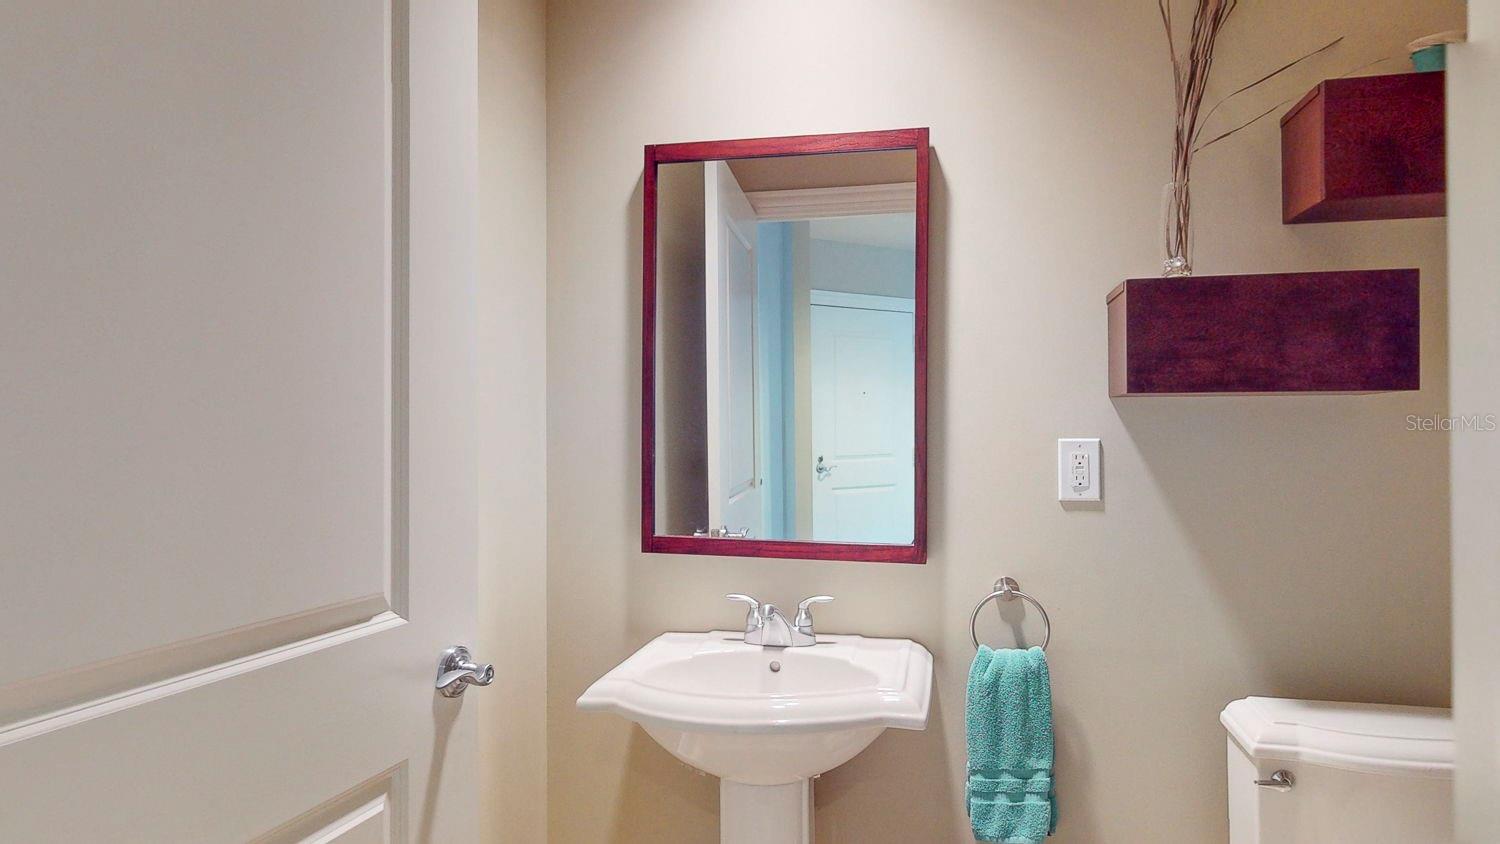 The half bath is conveniently located for guests.